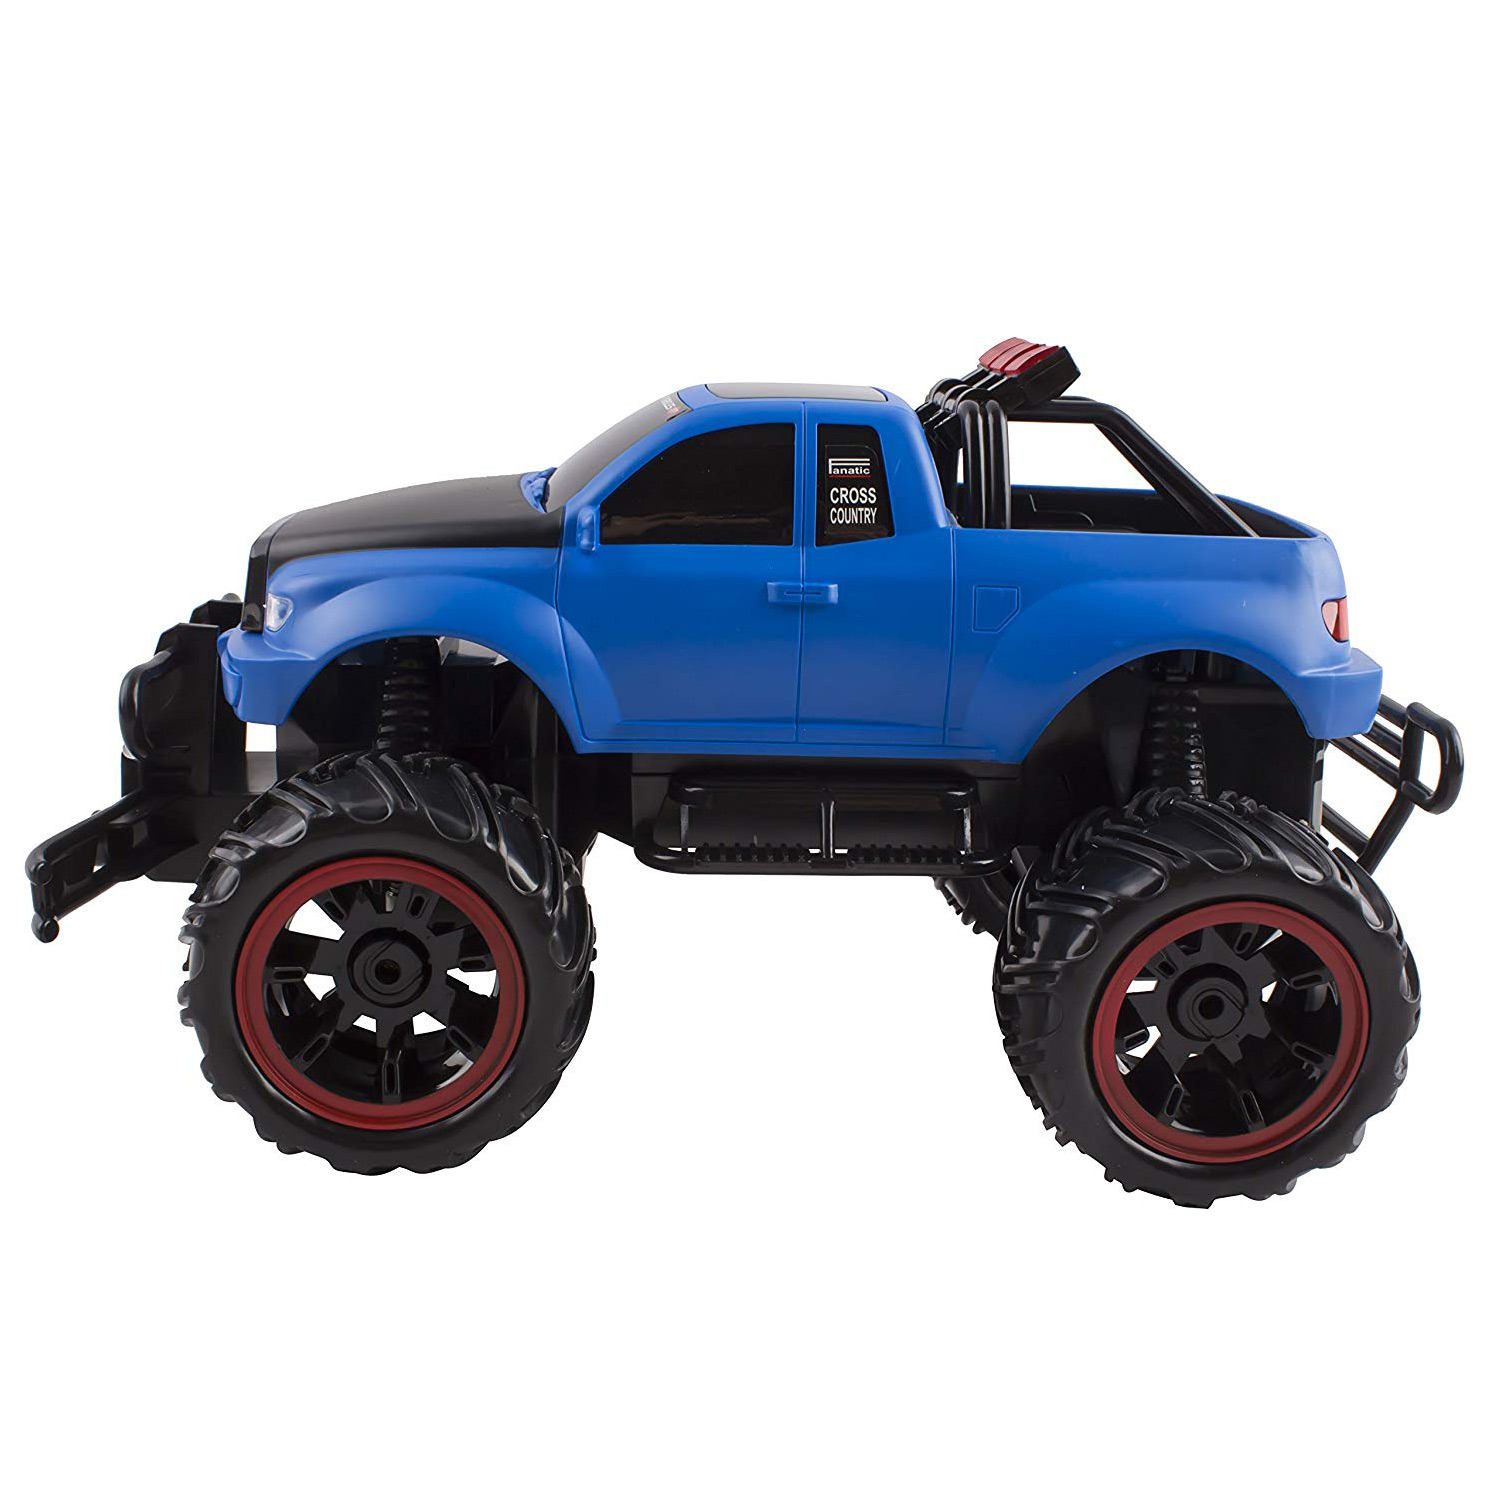 Remote Control Car RX8 1:10 Scale Speed Large Buggy Ages 8 Toy Jeep Race Big